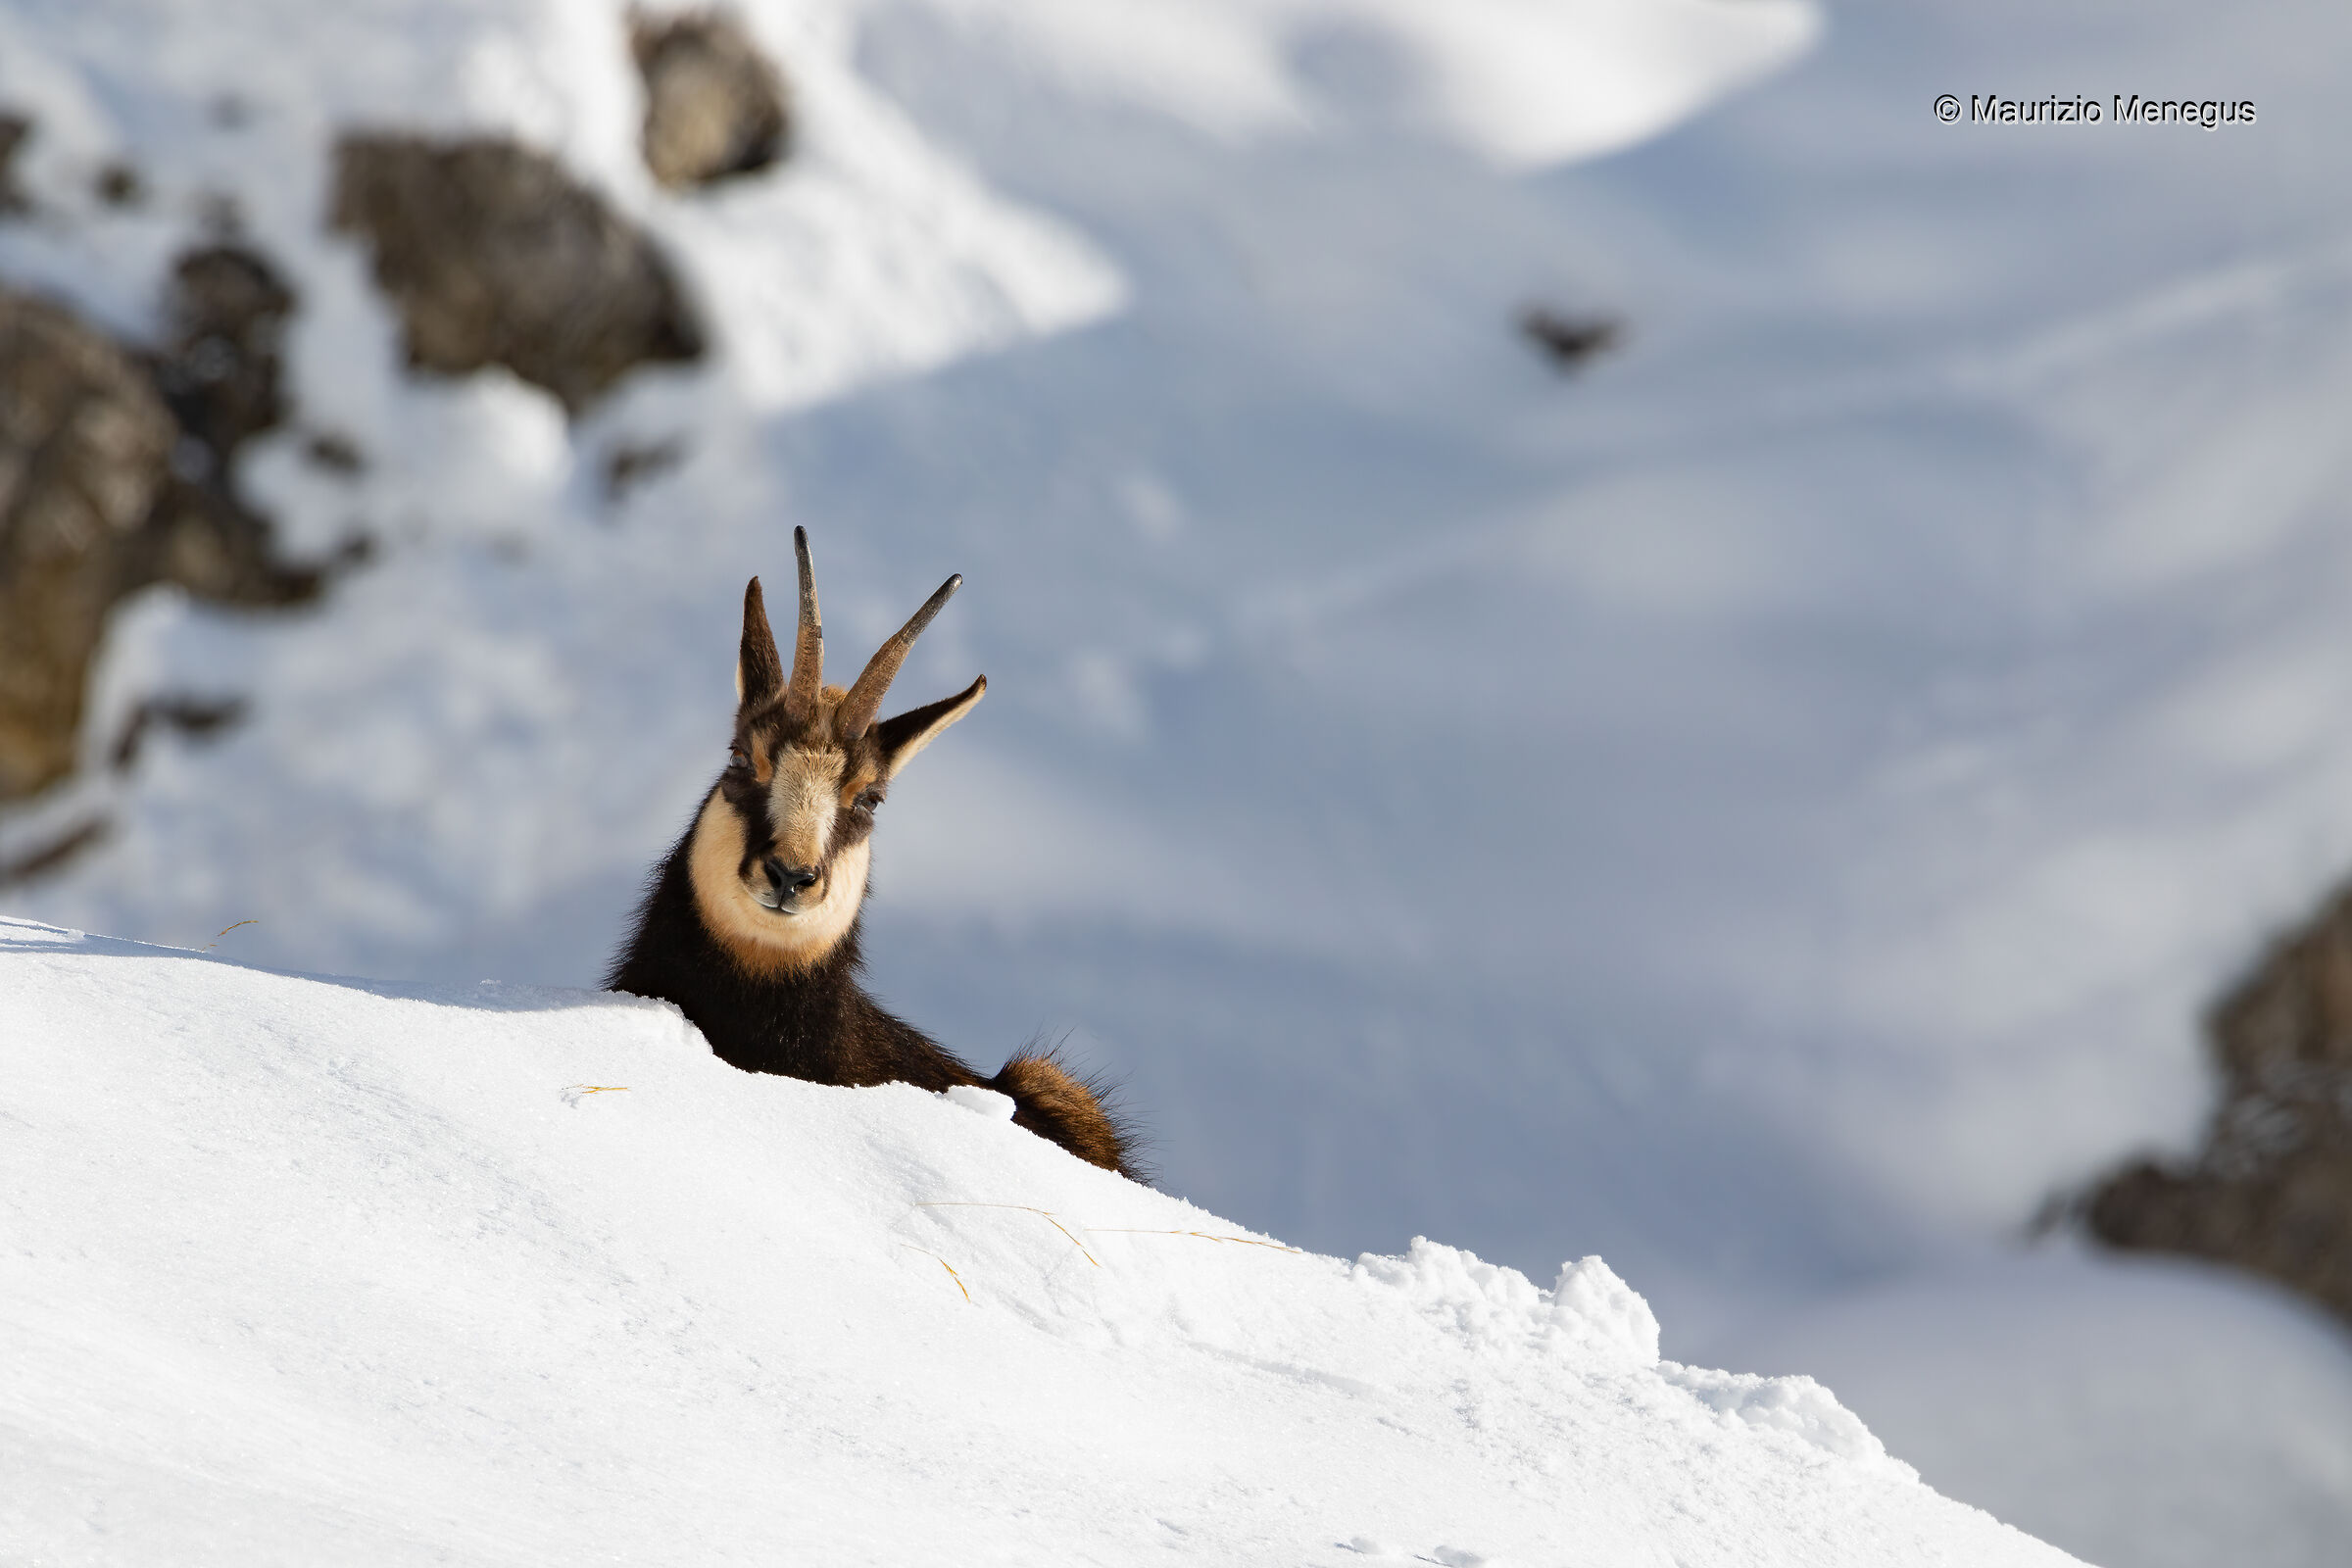 The chamois rests in the snow...